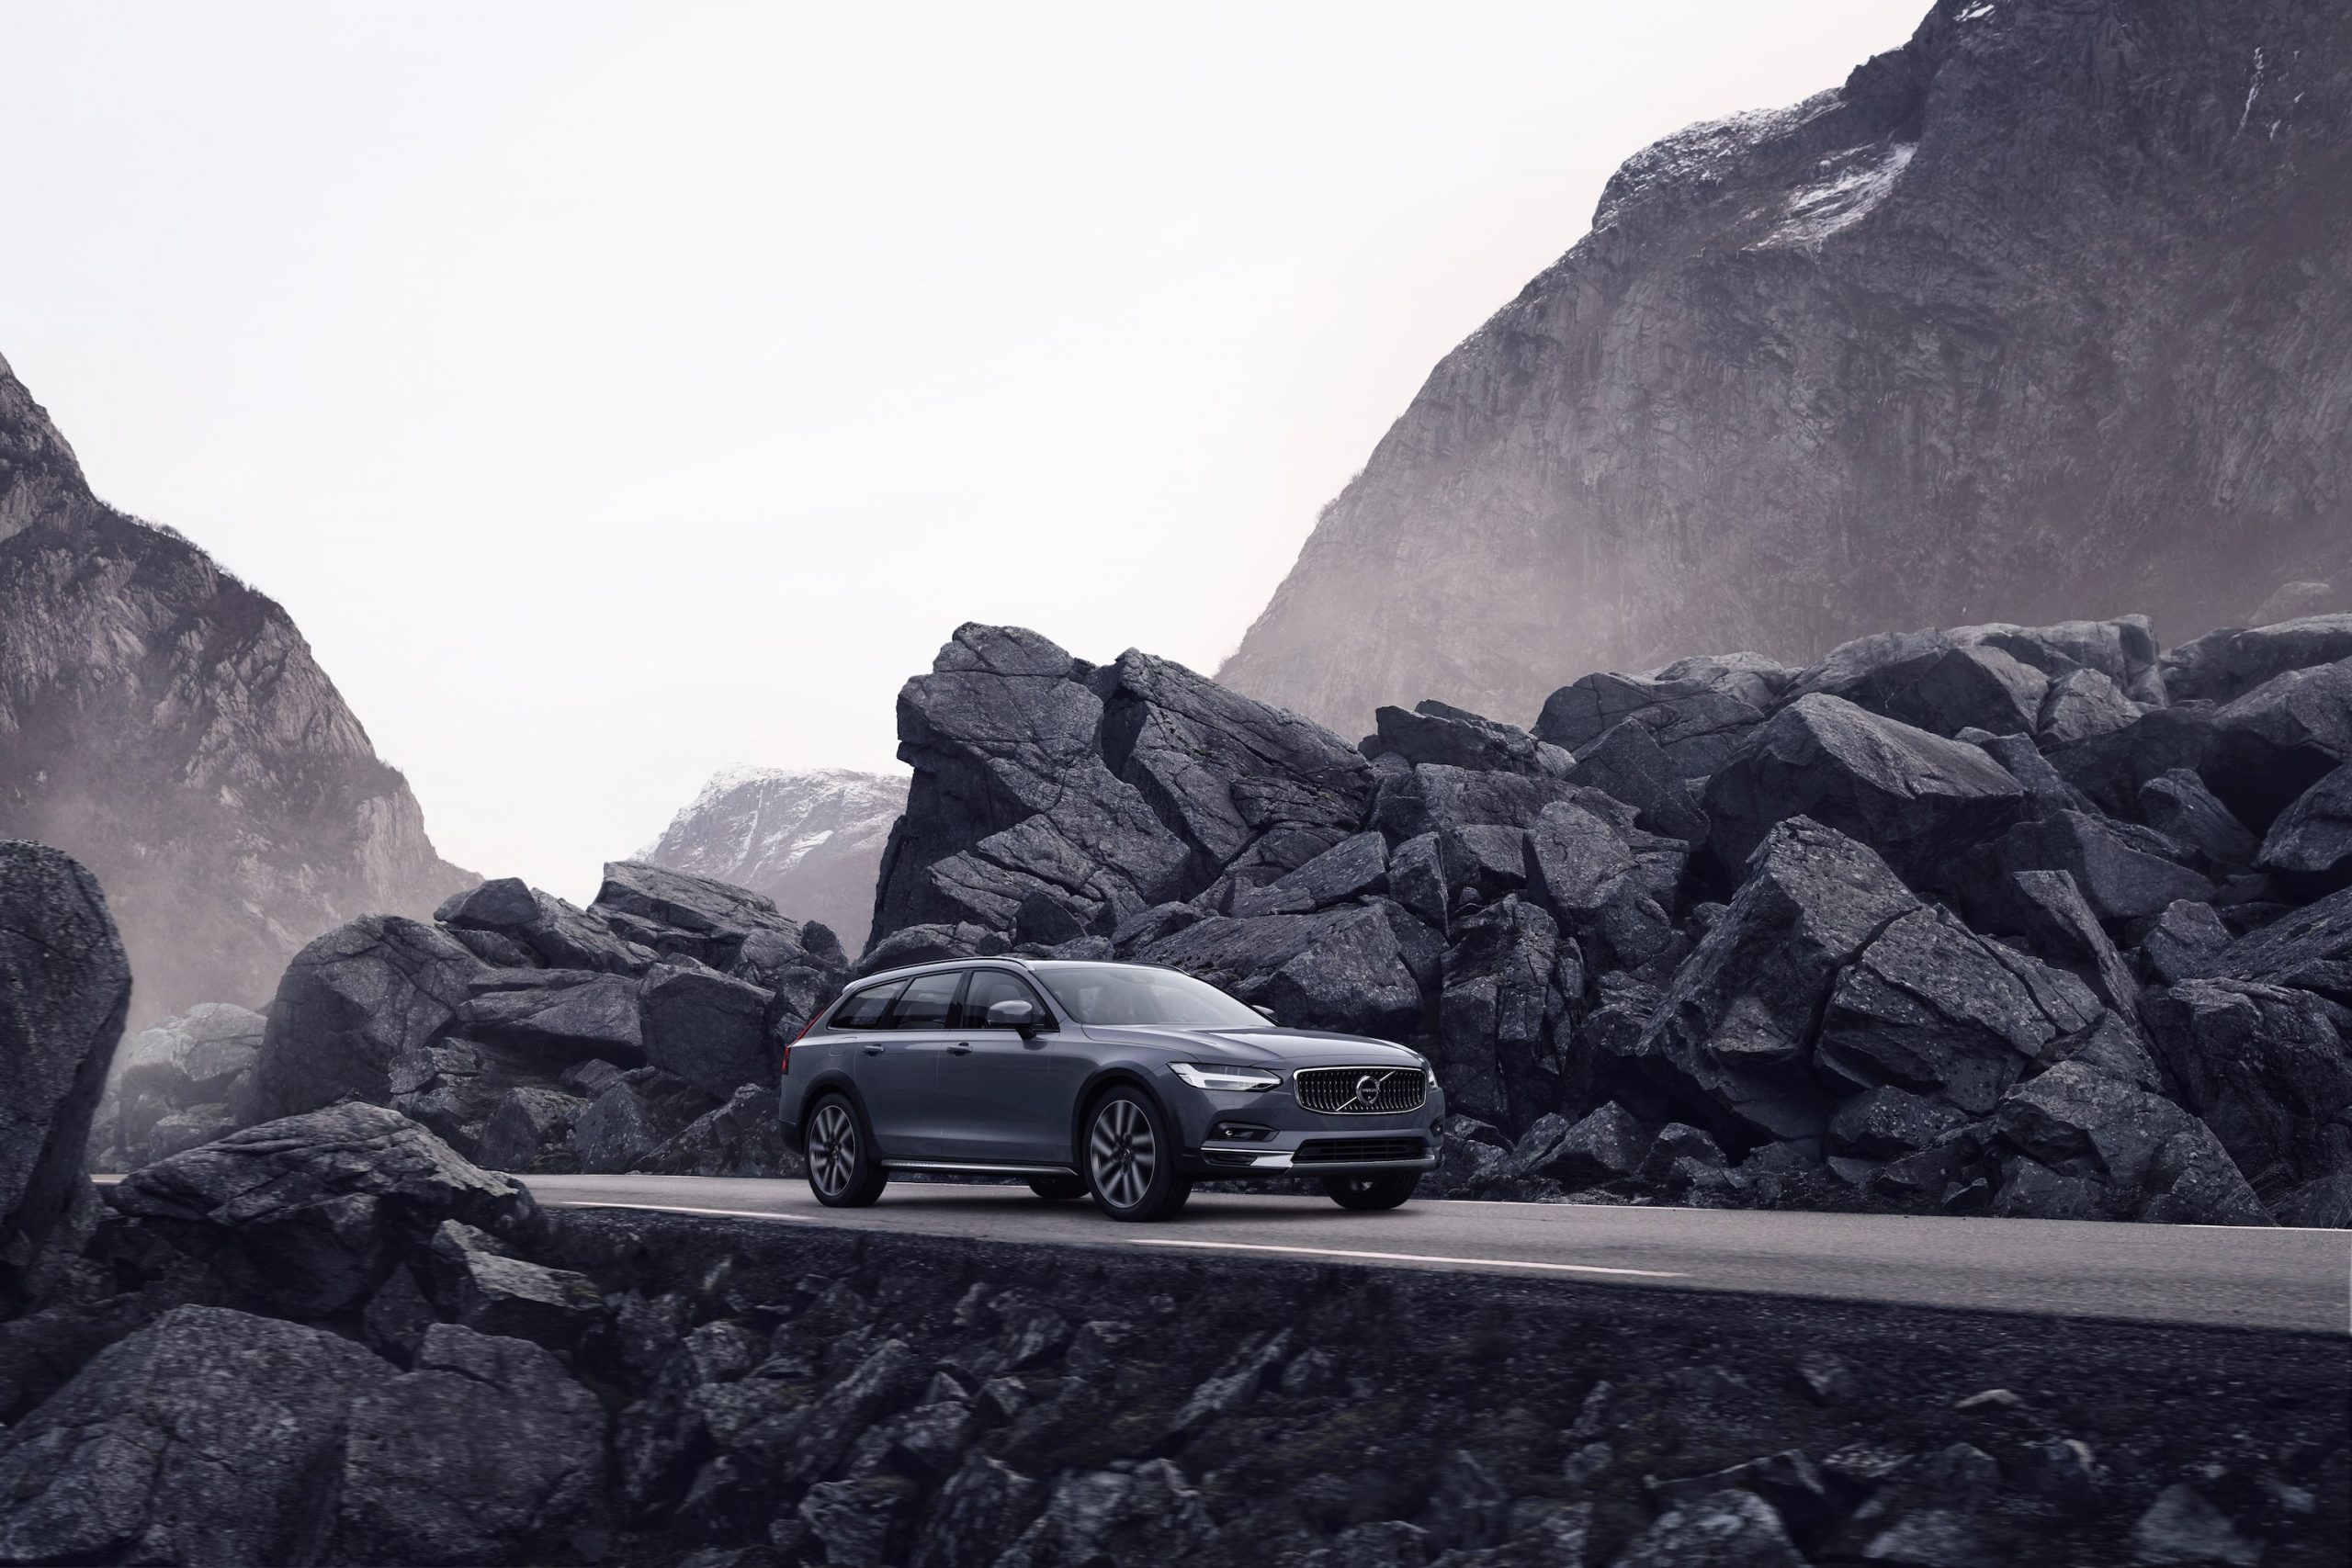 grey Volvo driving through the mountains